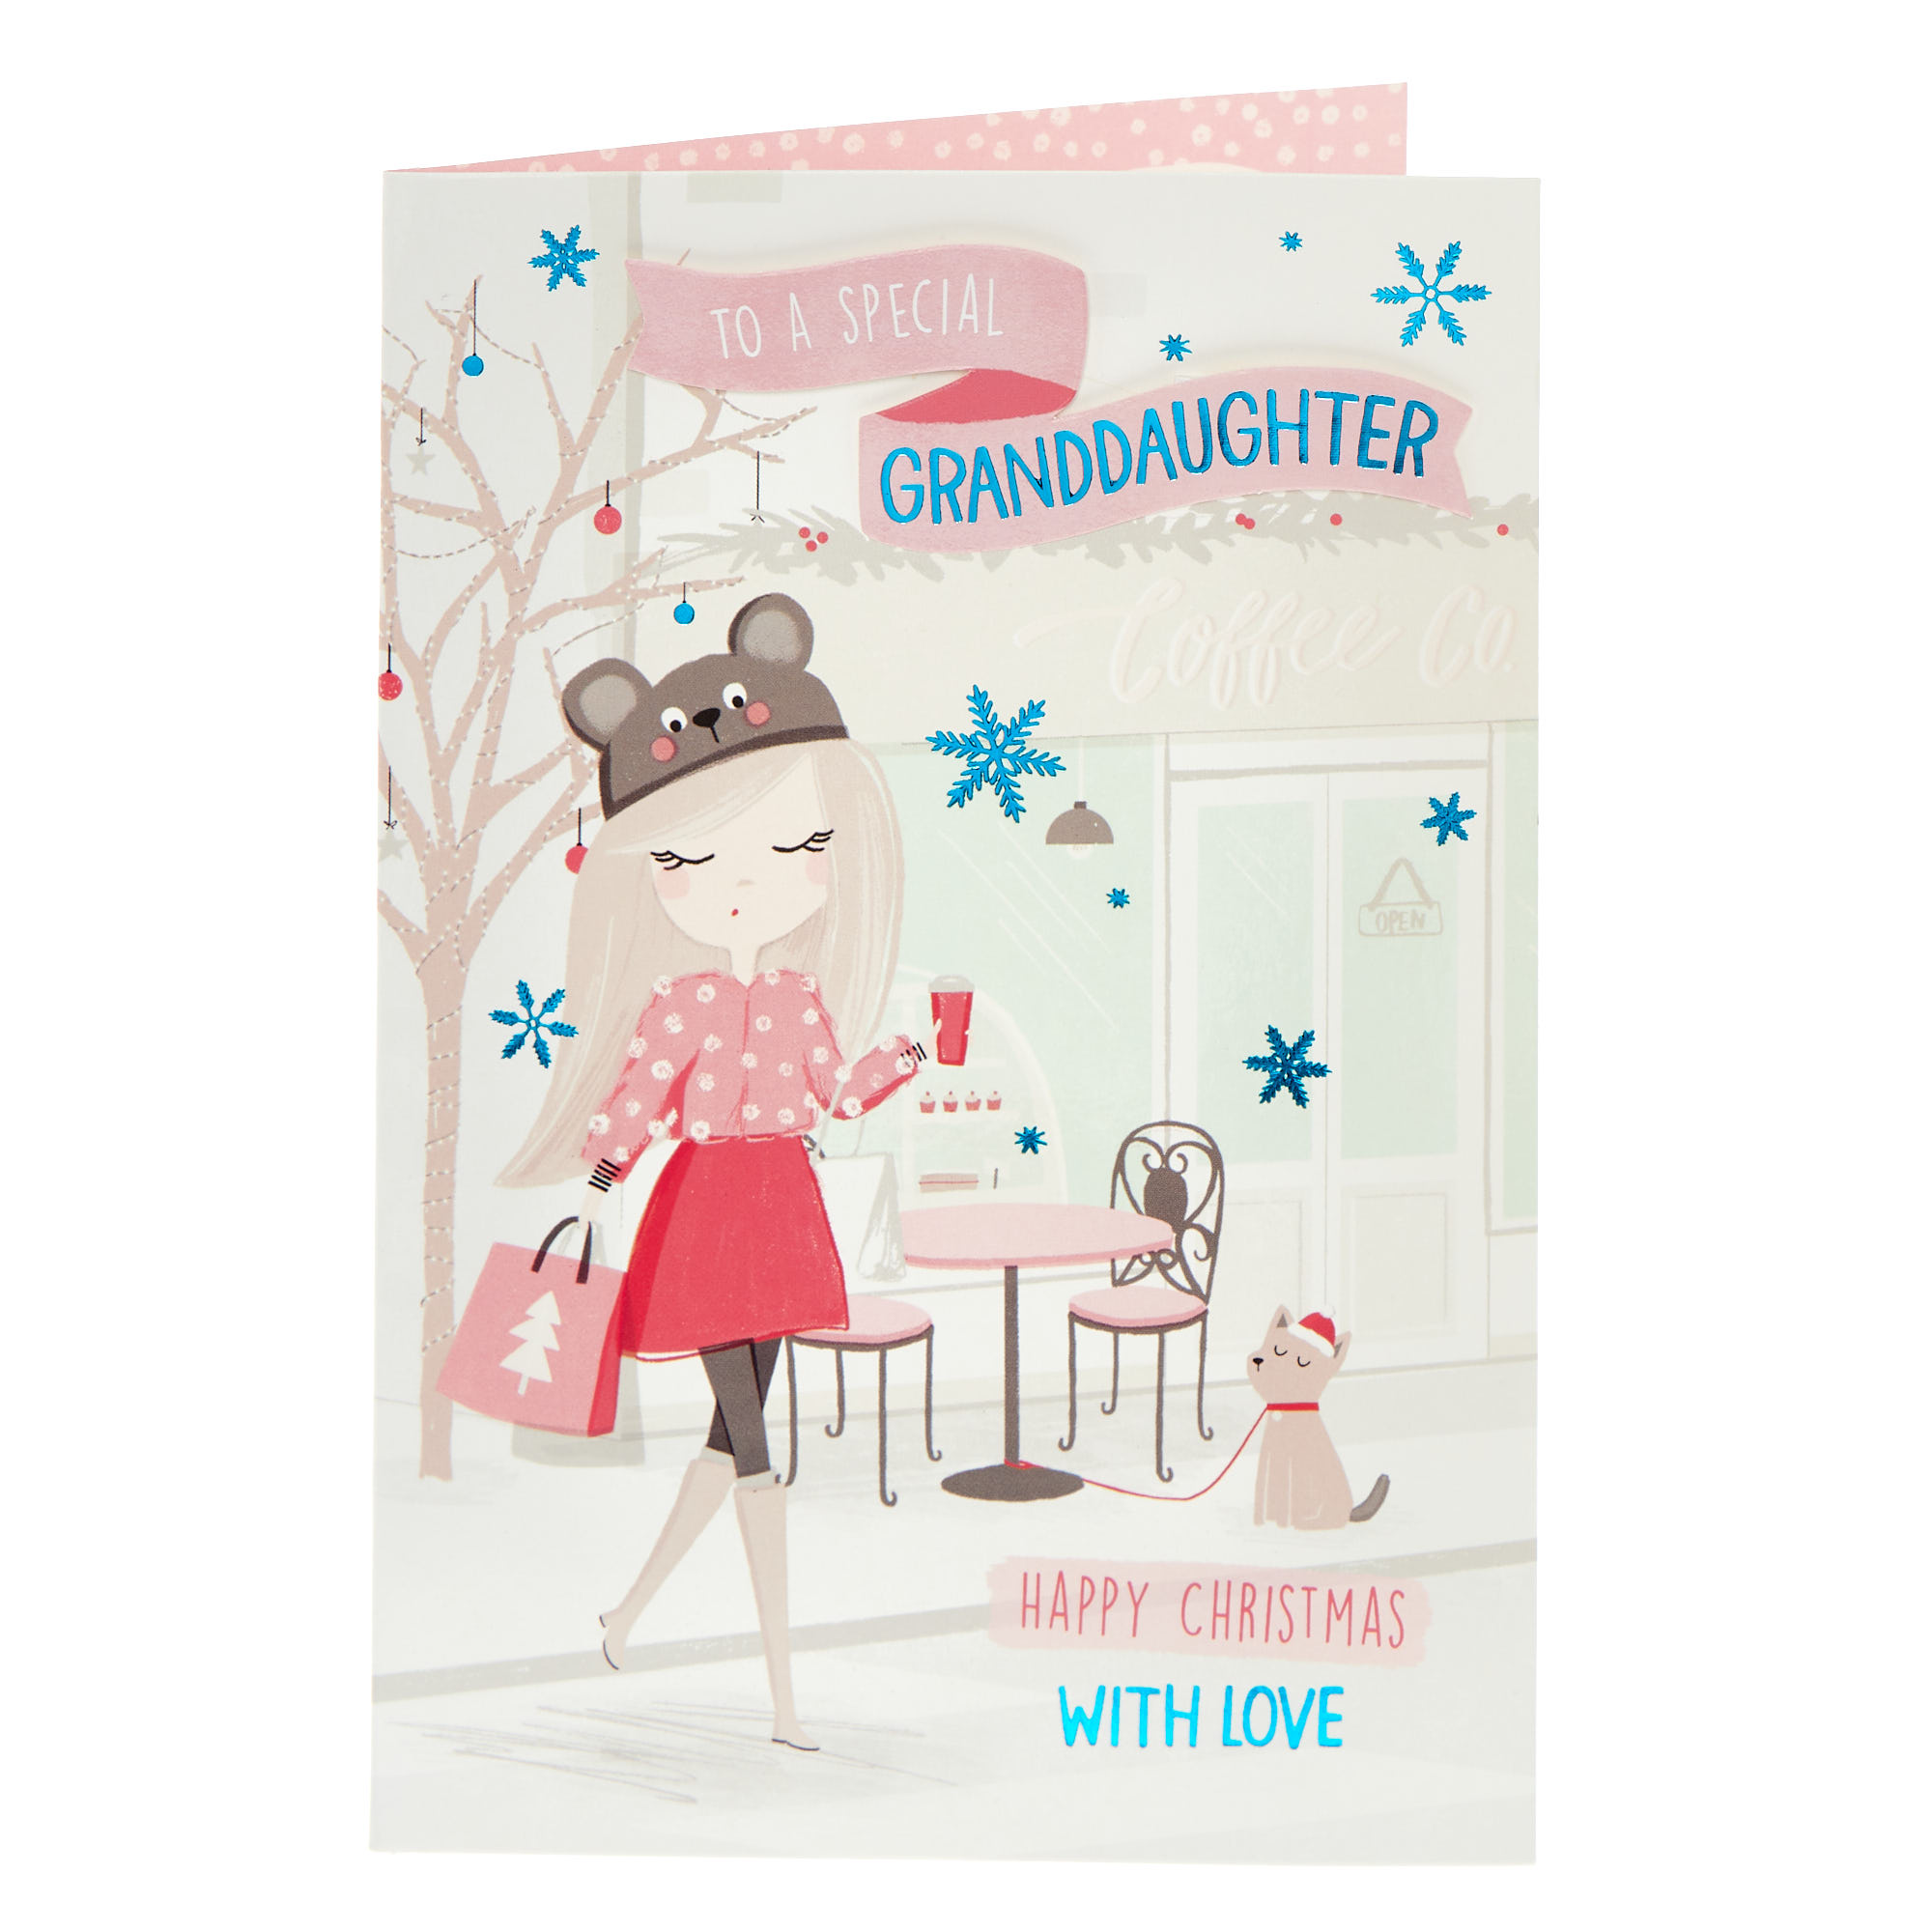 Special Granddaughter Shopping Christmas Card